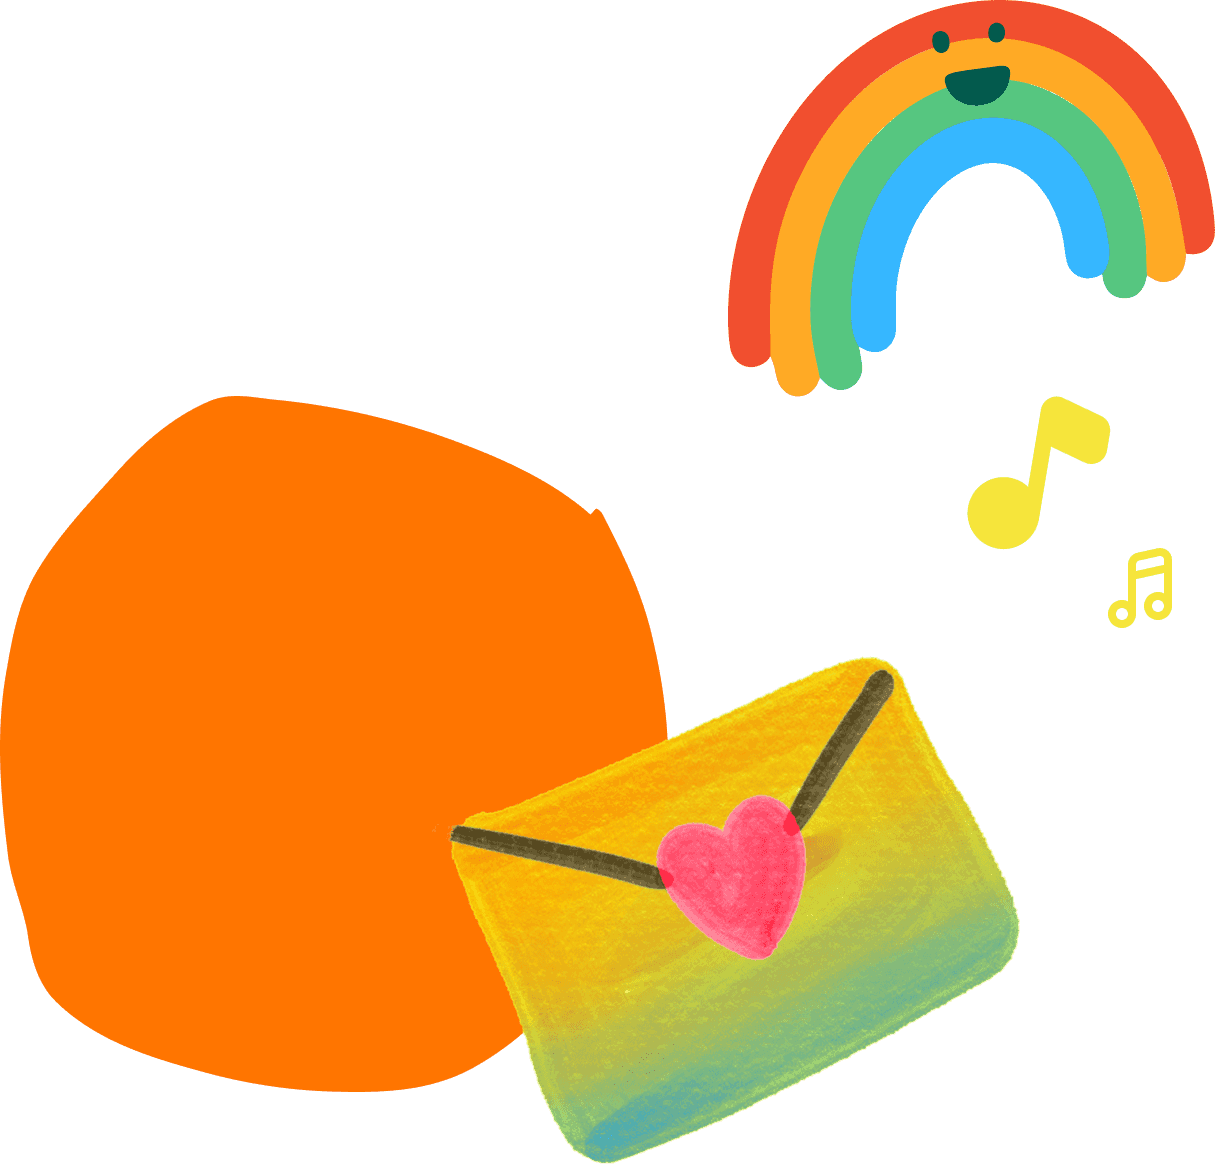 a colorful illustration of an envelope and a rainbow